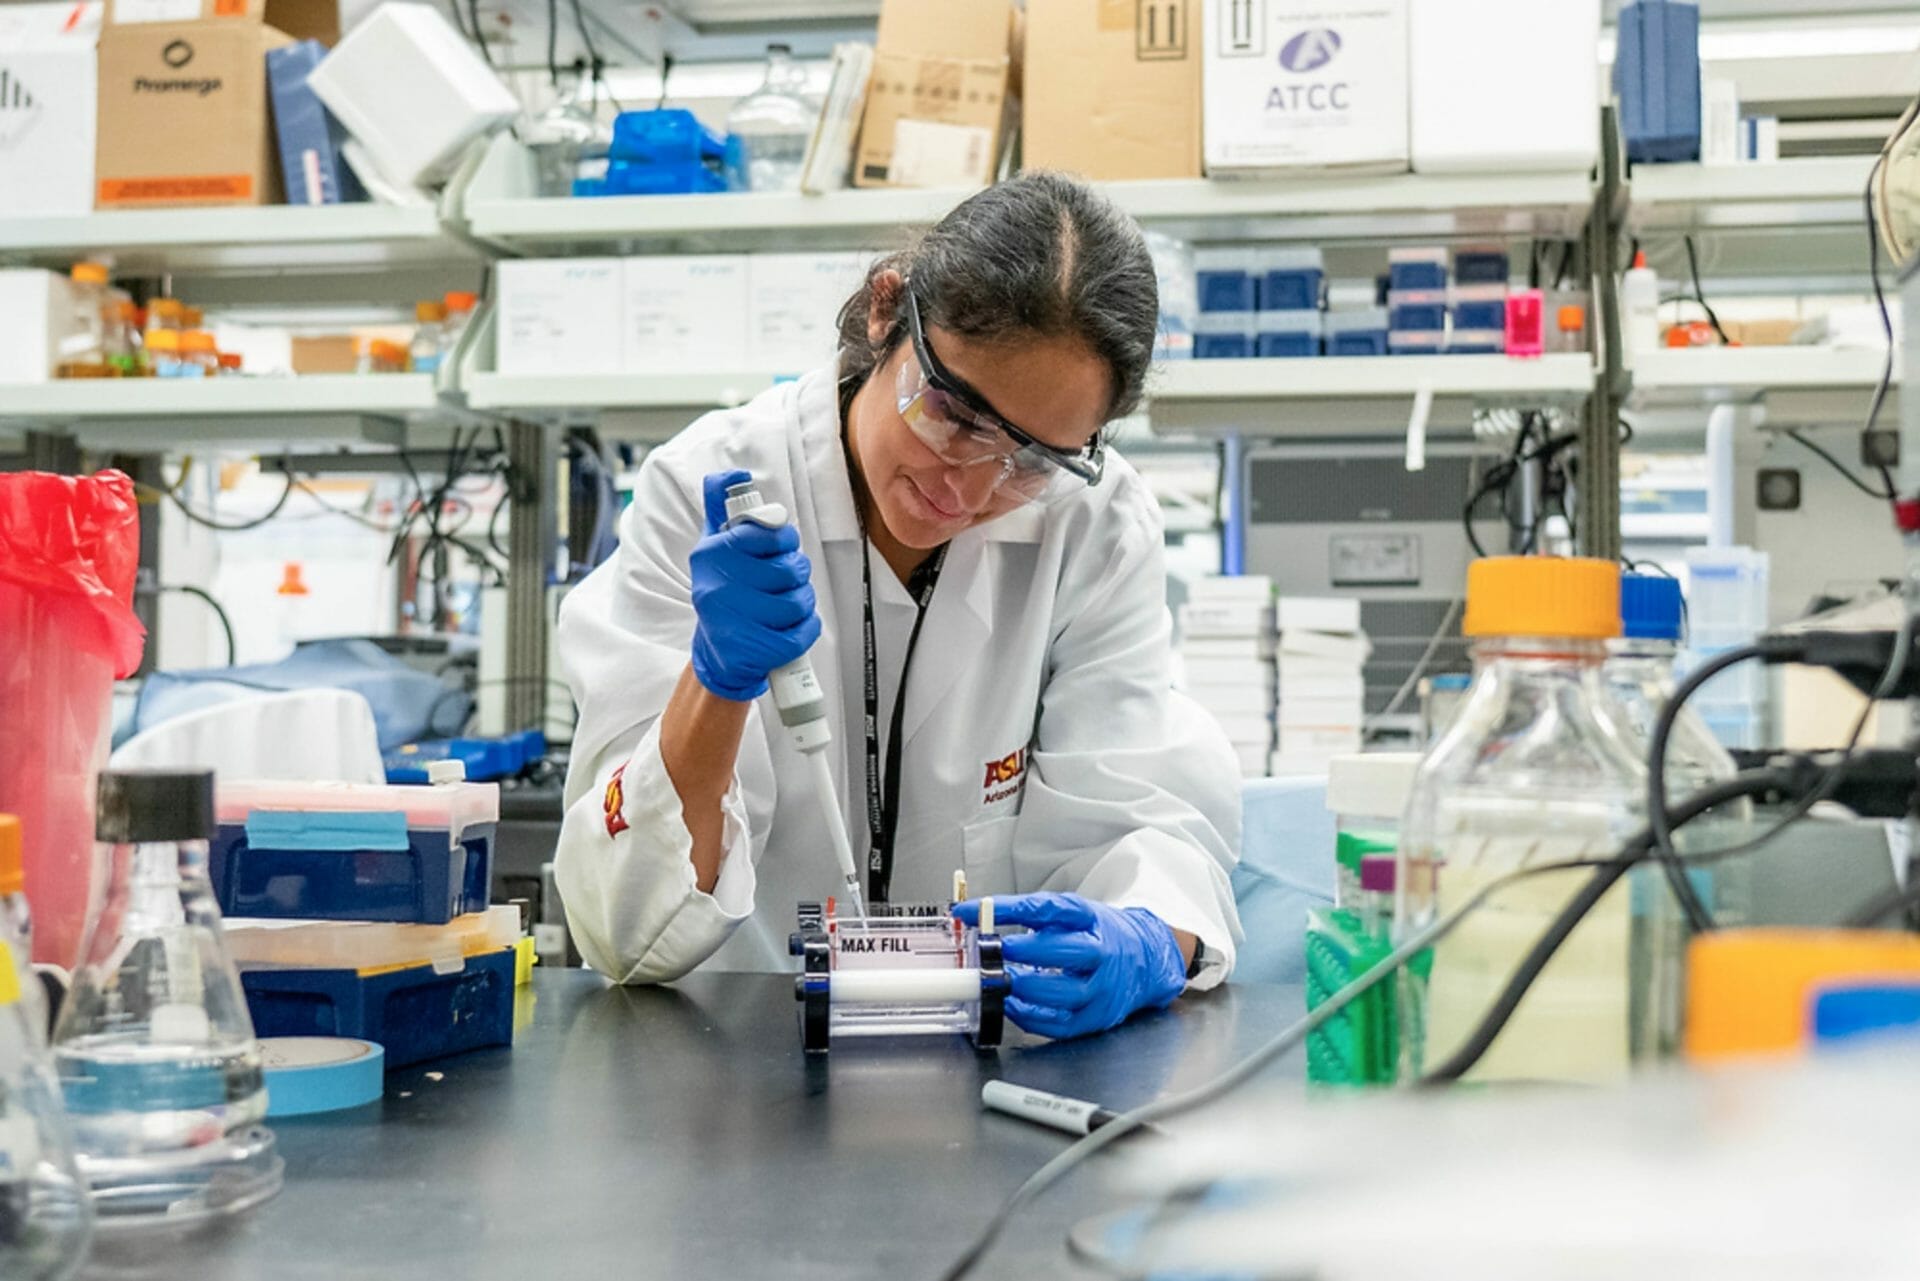 Research Specialist Ami Gutierrez-Jensen uses a pipette at the Center for Immunotherapy, Vaccines and Virotherapy in Tempe on April 15, 2022. (Photo by Samantha Chow/ASU)